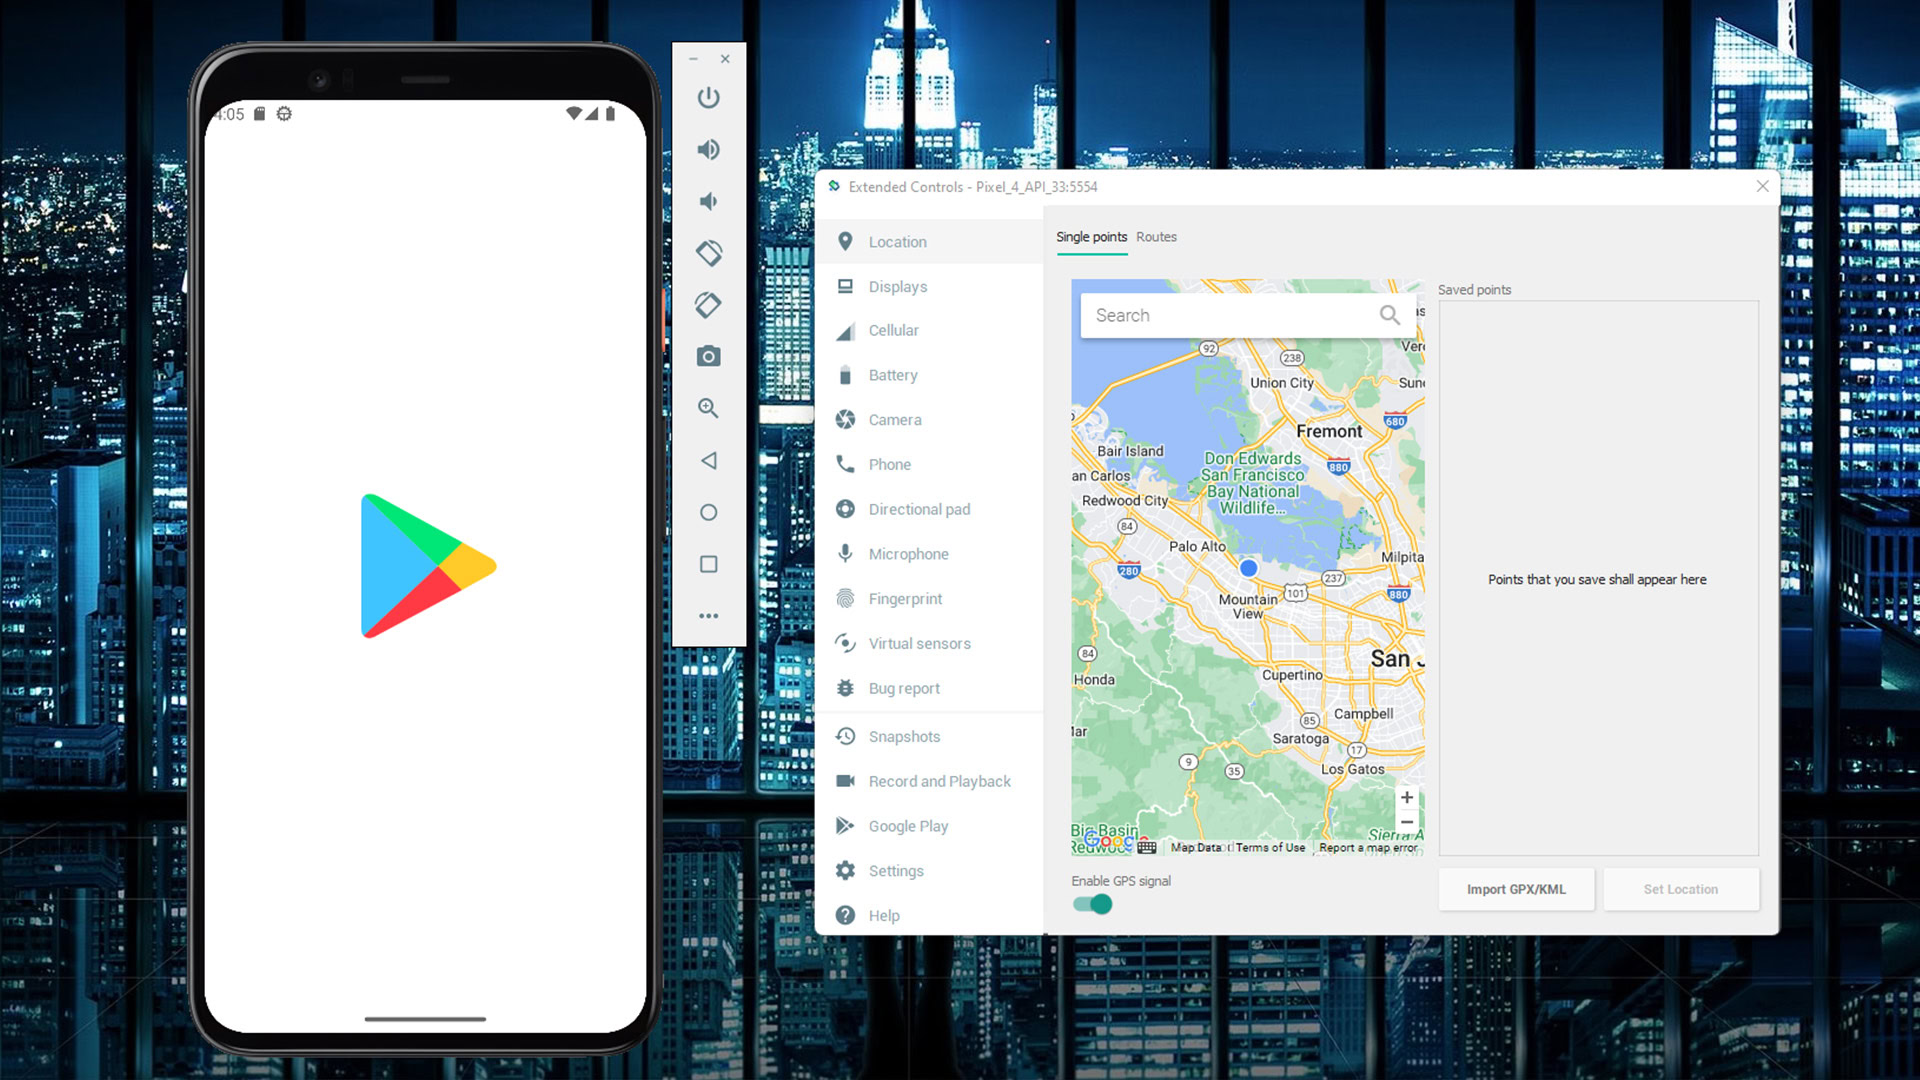 Download Google Play Store APK Android - Andy - Android Emulator for PC &  Mac